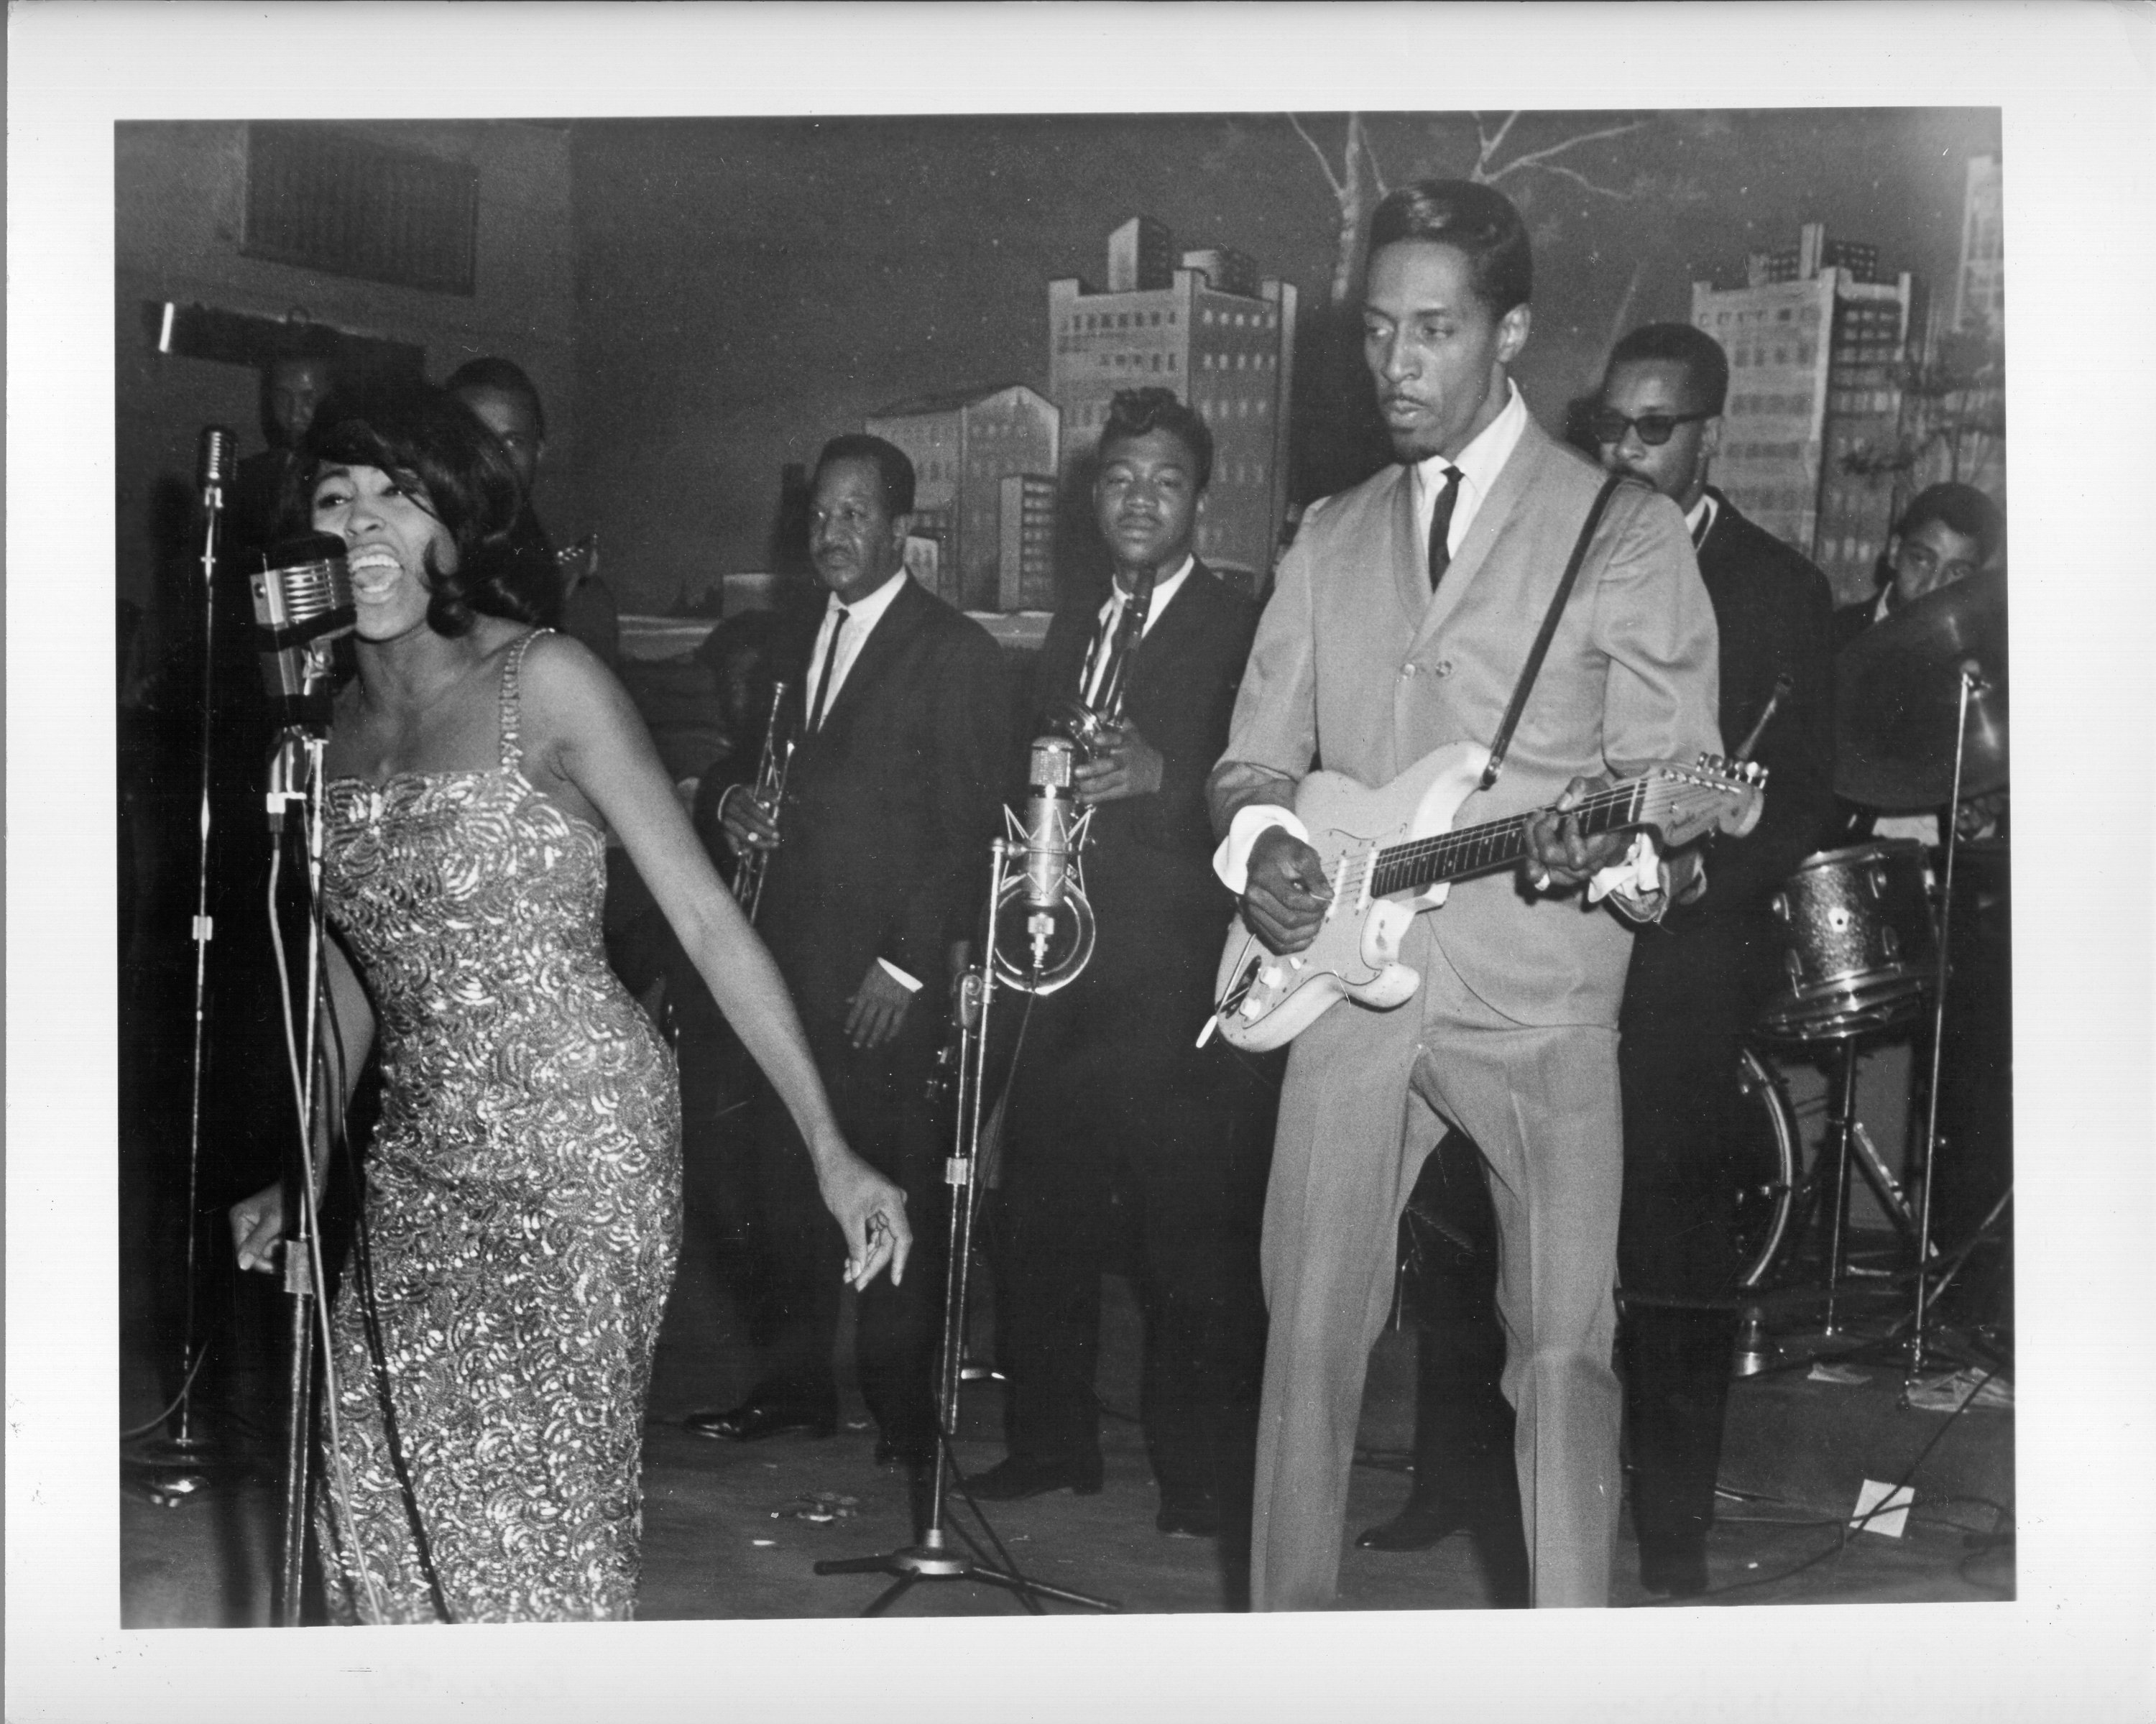 Husband-and-wife R&B duo Ike & Tina Turner perform onstage with a Fender Stratocaster electric guitar in 1964 in Dallas Fort Worth, Texas. | Source: Getty Images